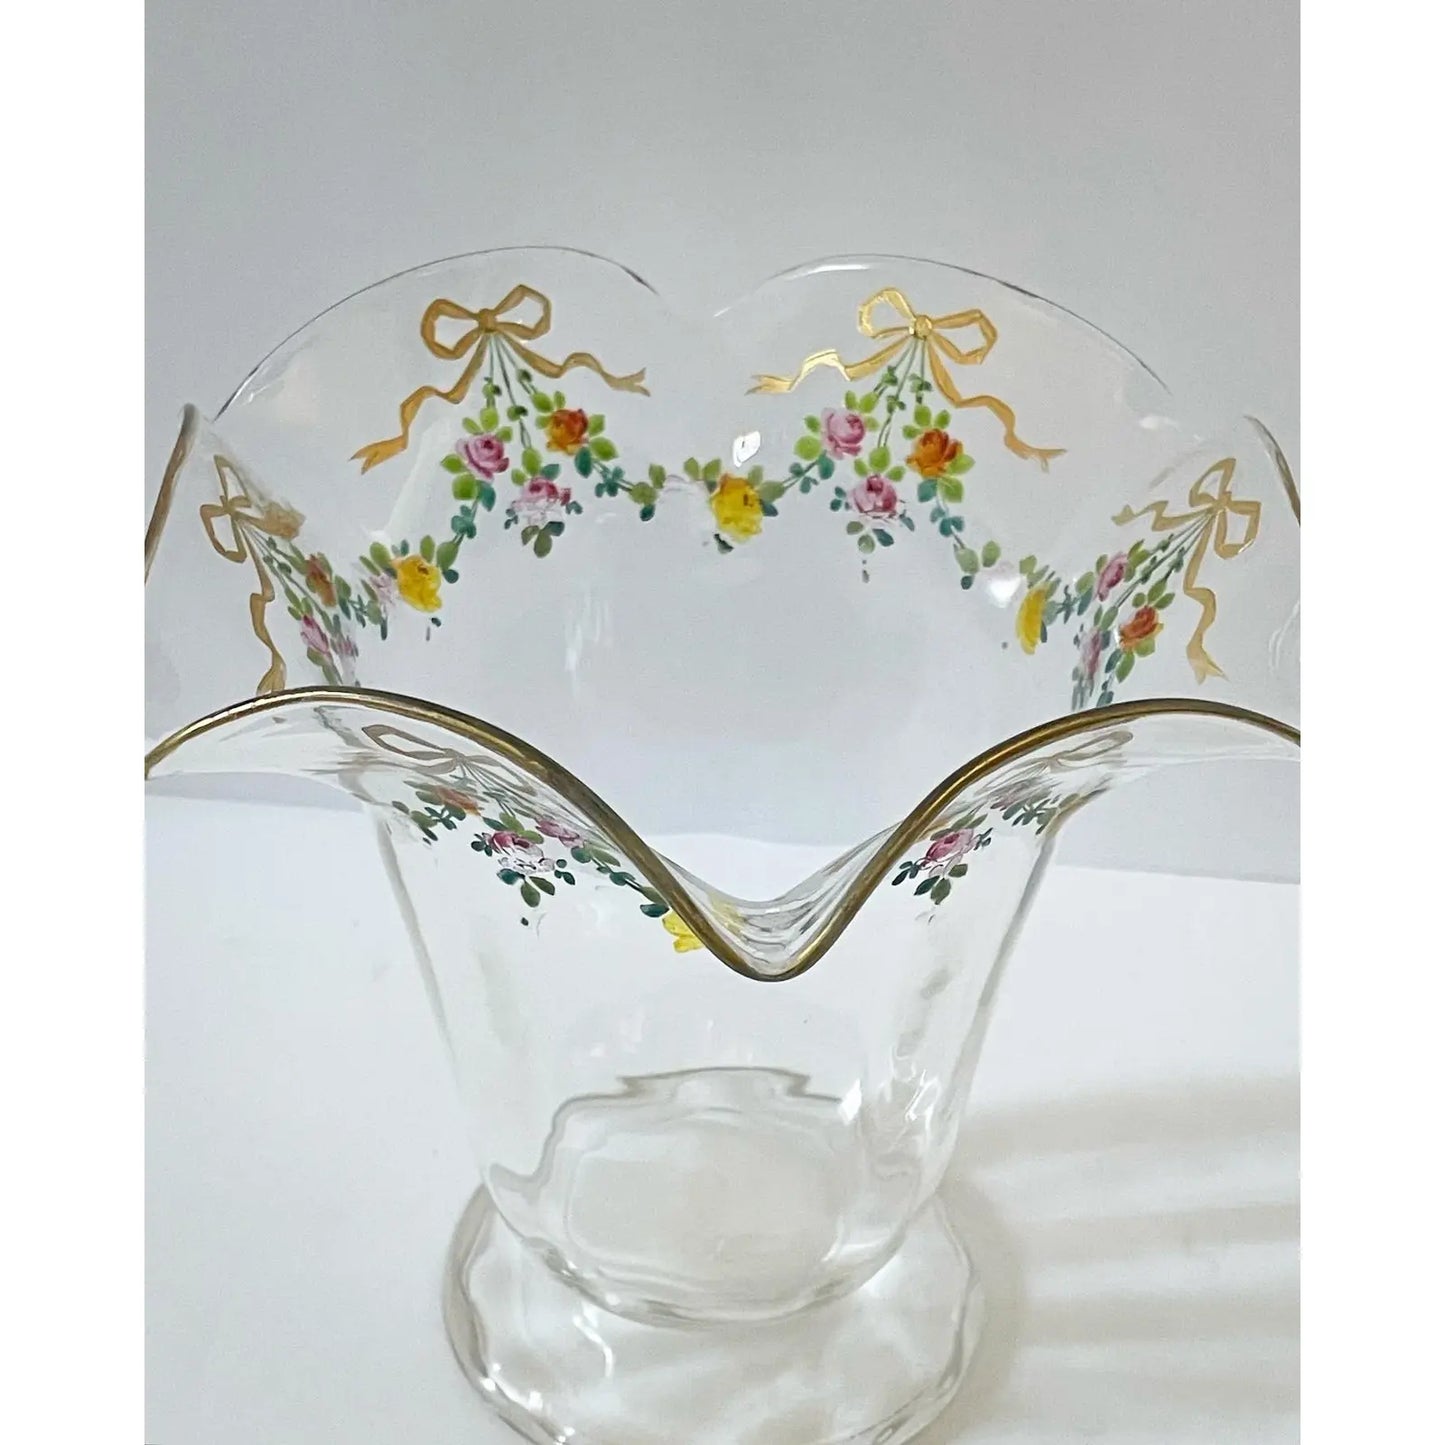 Vintage Early 20th Century Hand Blown Vase With Hand Painted Floral Swags and Gold Ribbons